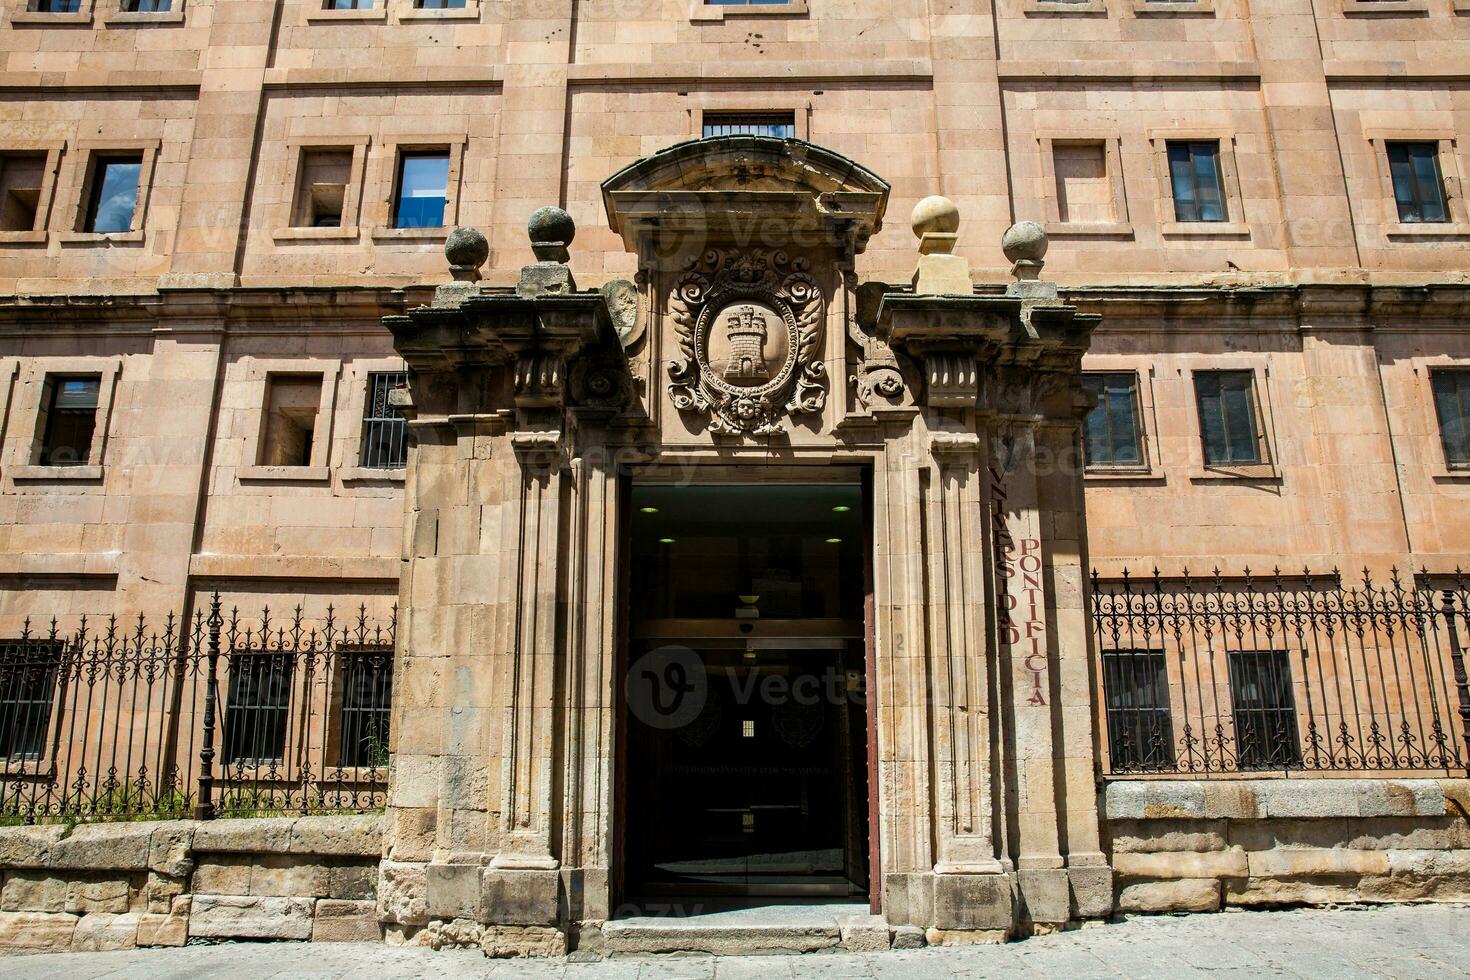 Building of the Royal College of the Holy Spirit of the Society of Jesus, La Clerencia, built in Salamanca between the 17th and 18th centuries and currently the University of Salamanca photo